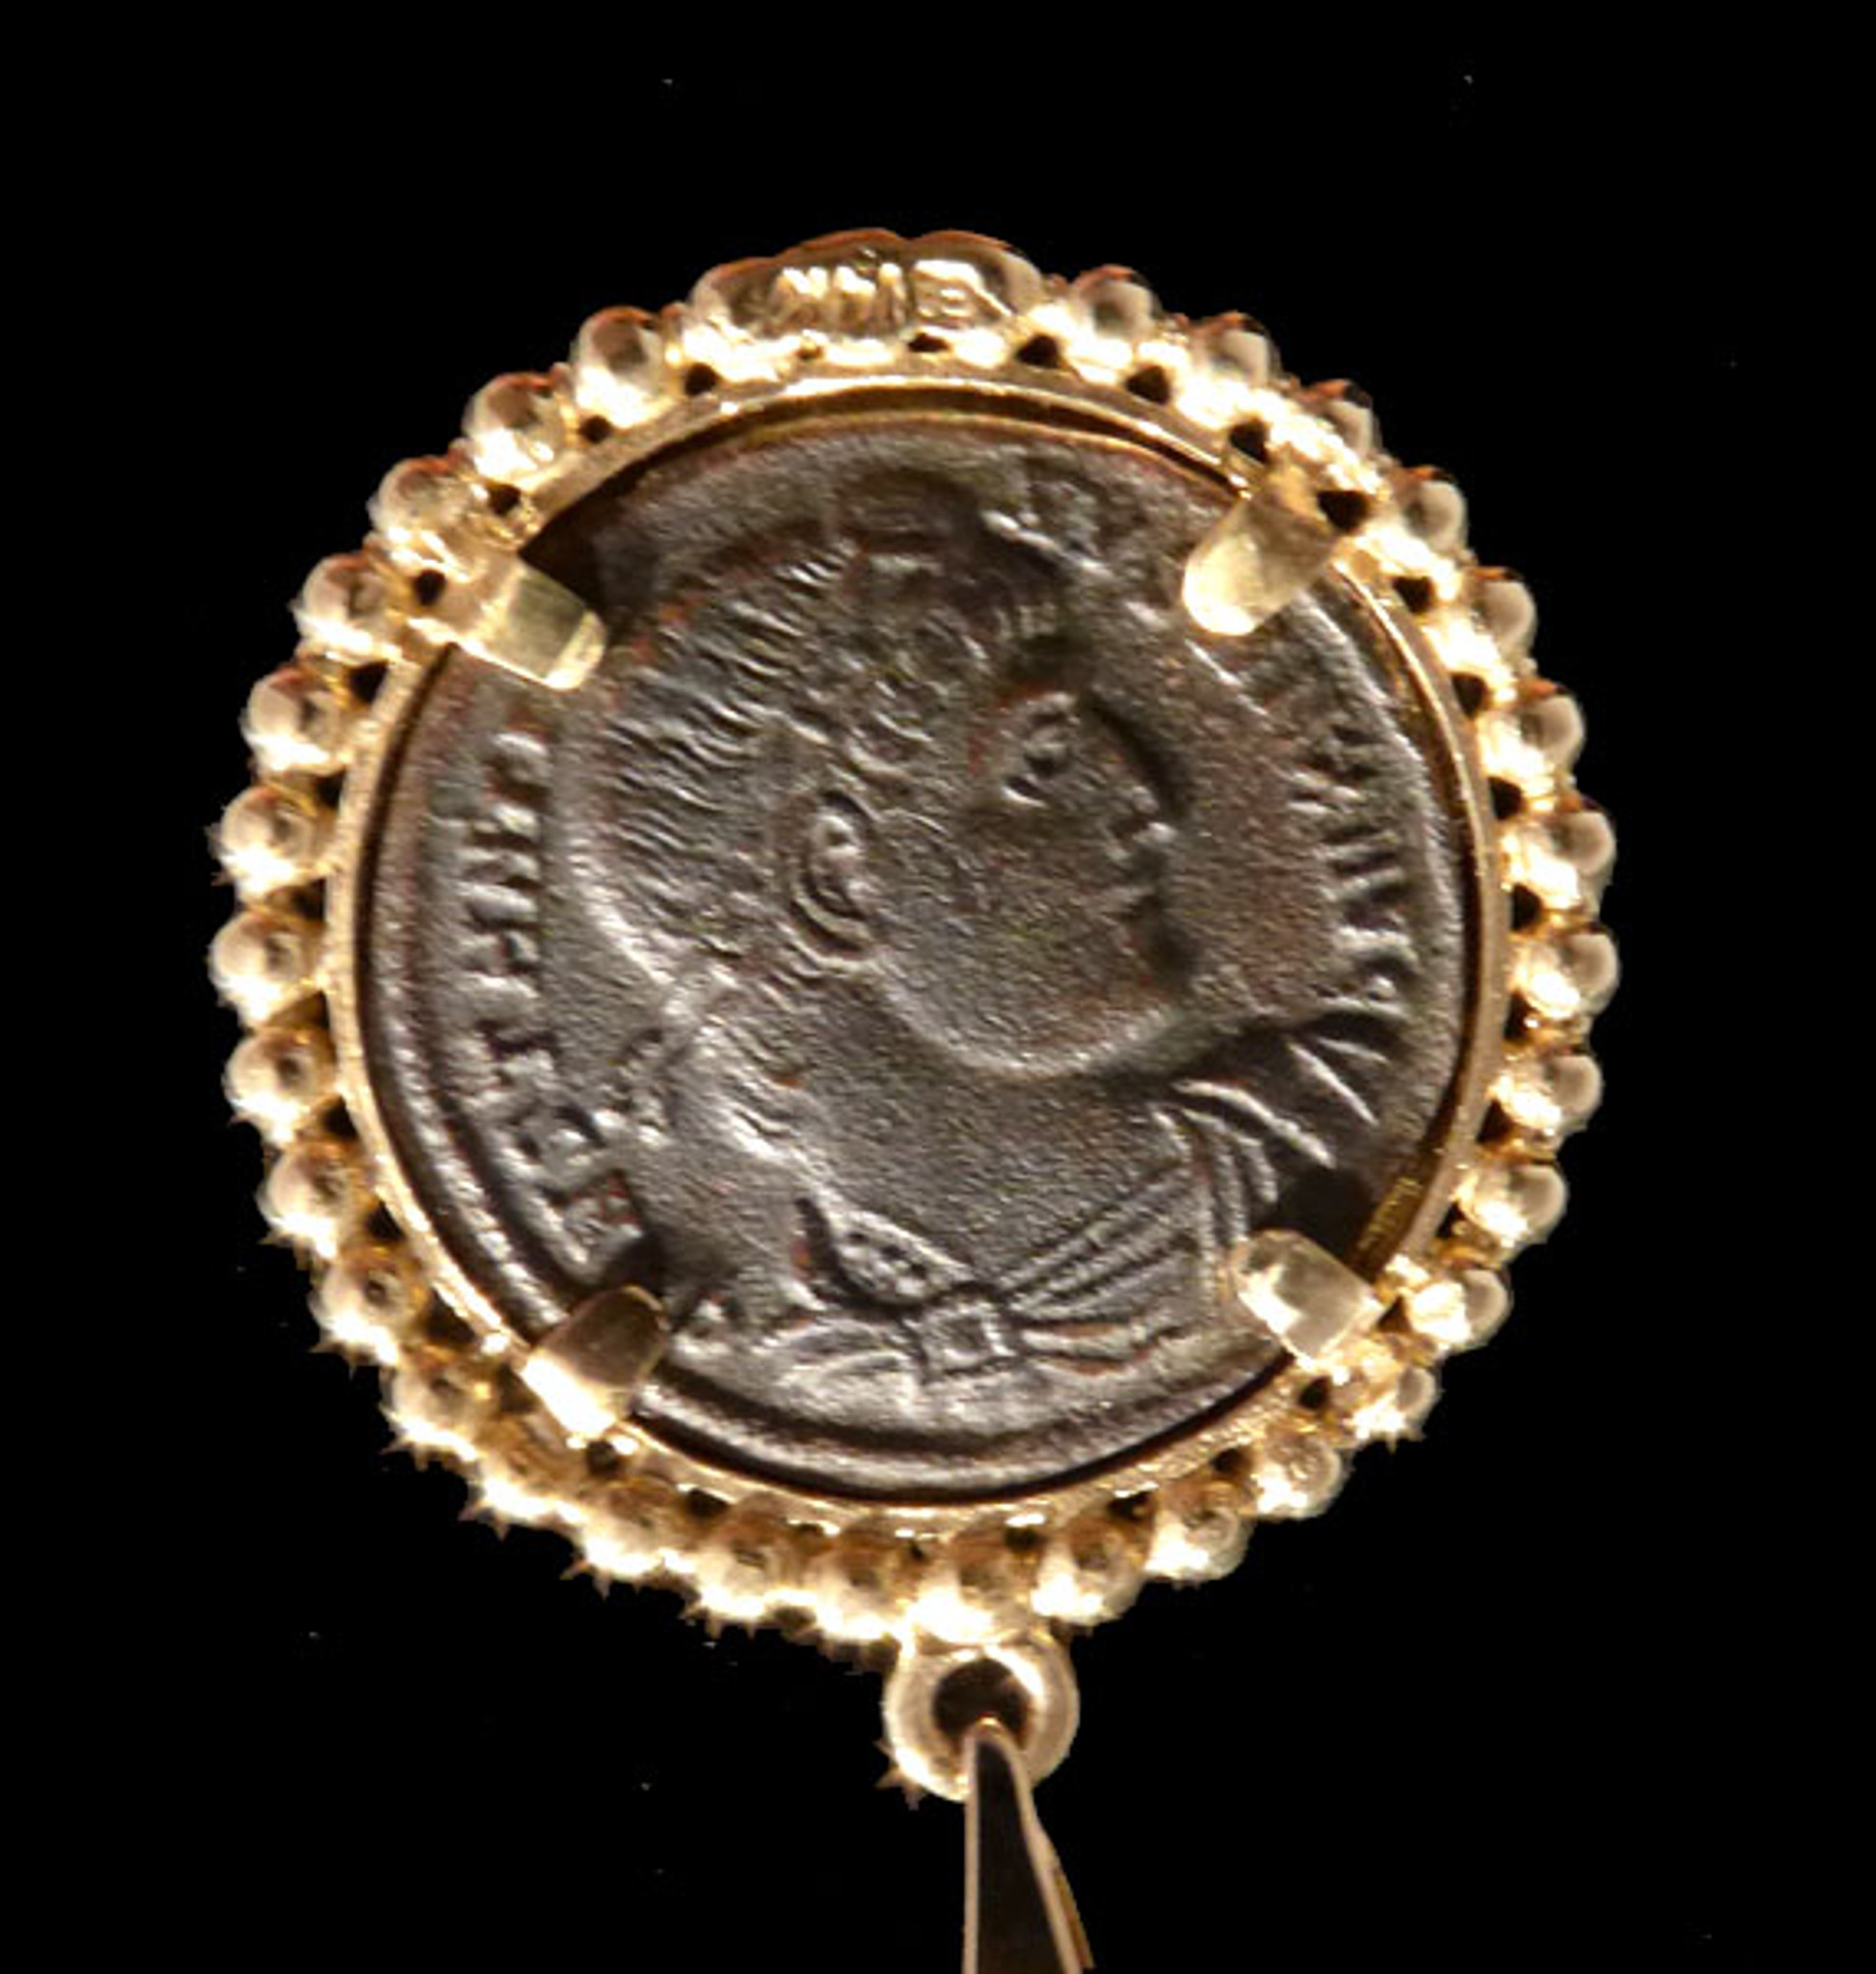 THE GLORY OF THE ARMY ANCIENT CHRISTIAN ROMAN COIN PENDANT IN 14K GOLD  *CPR222